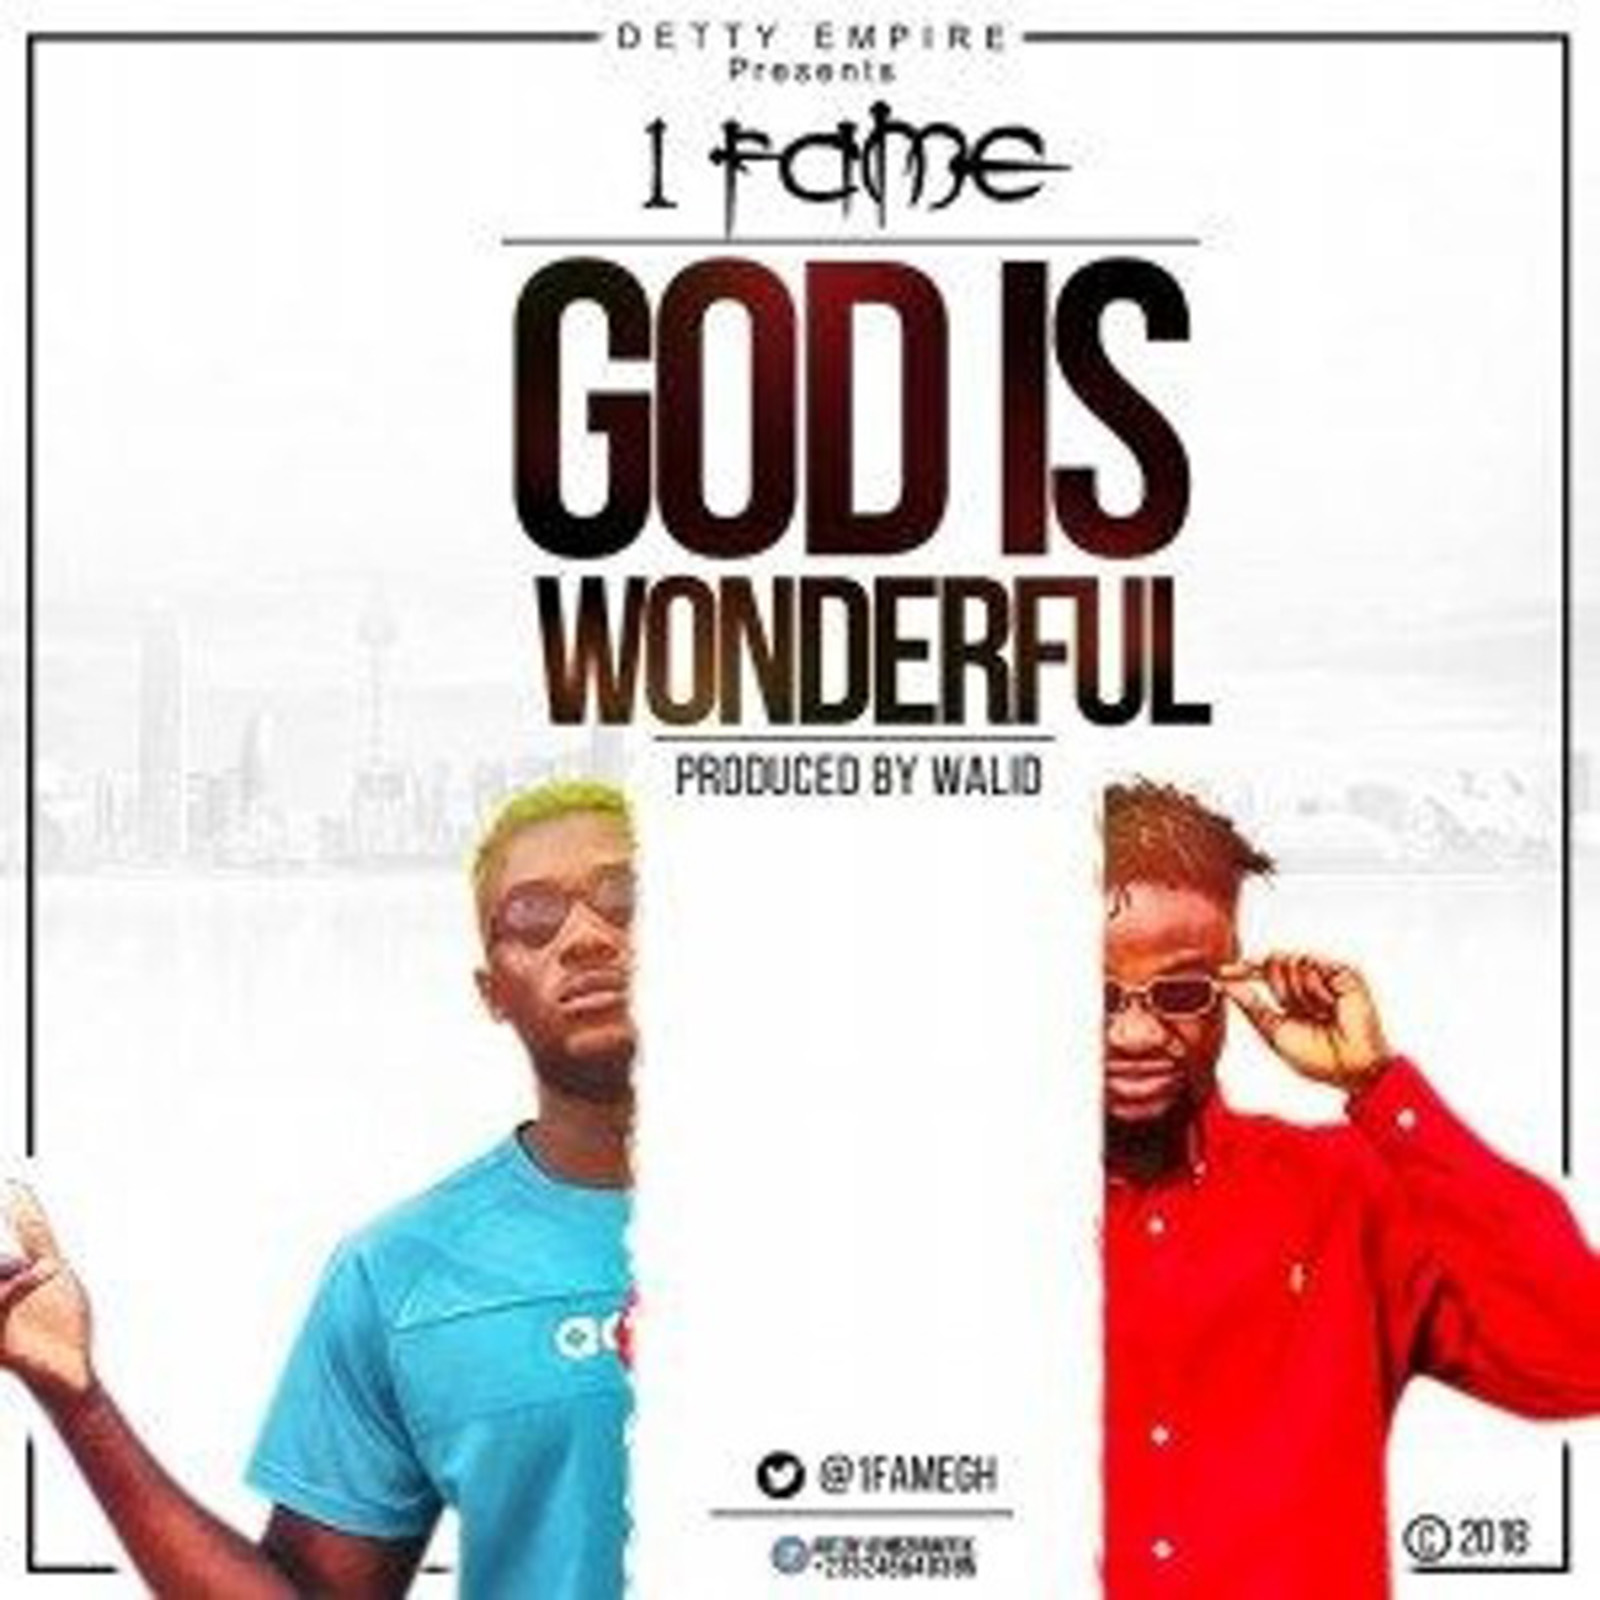 God Is Wonderful by 1 Fame